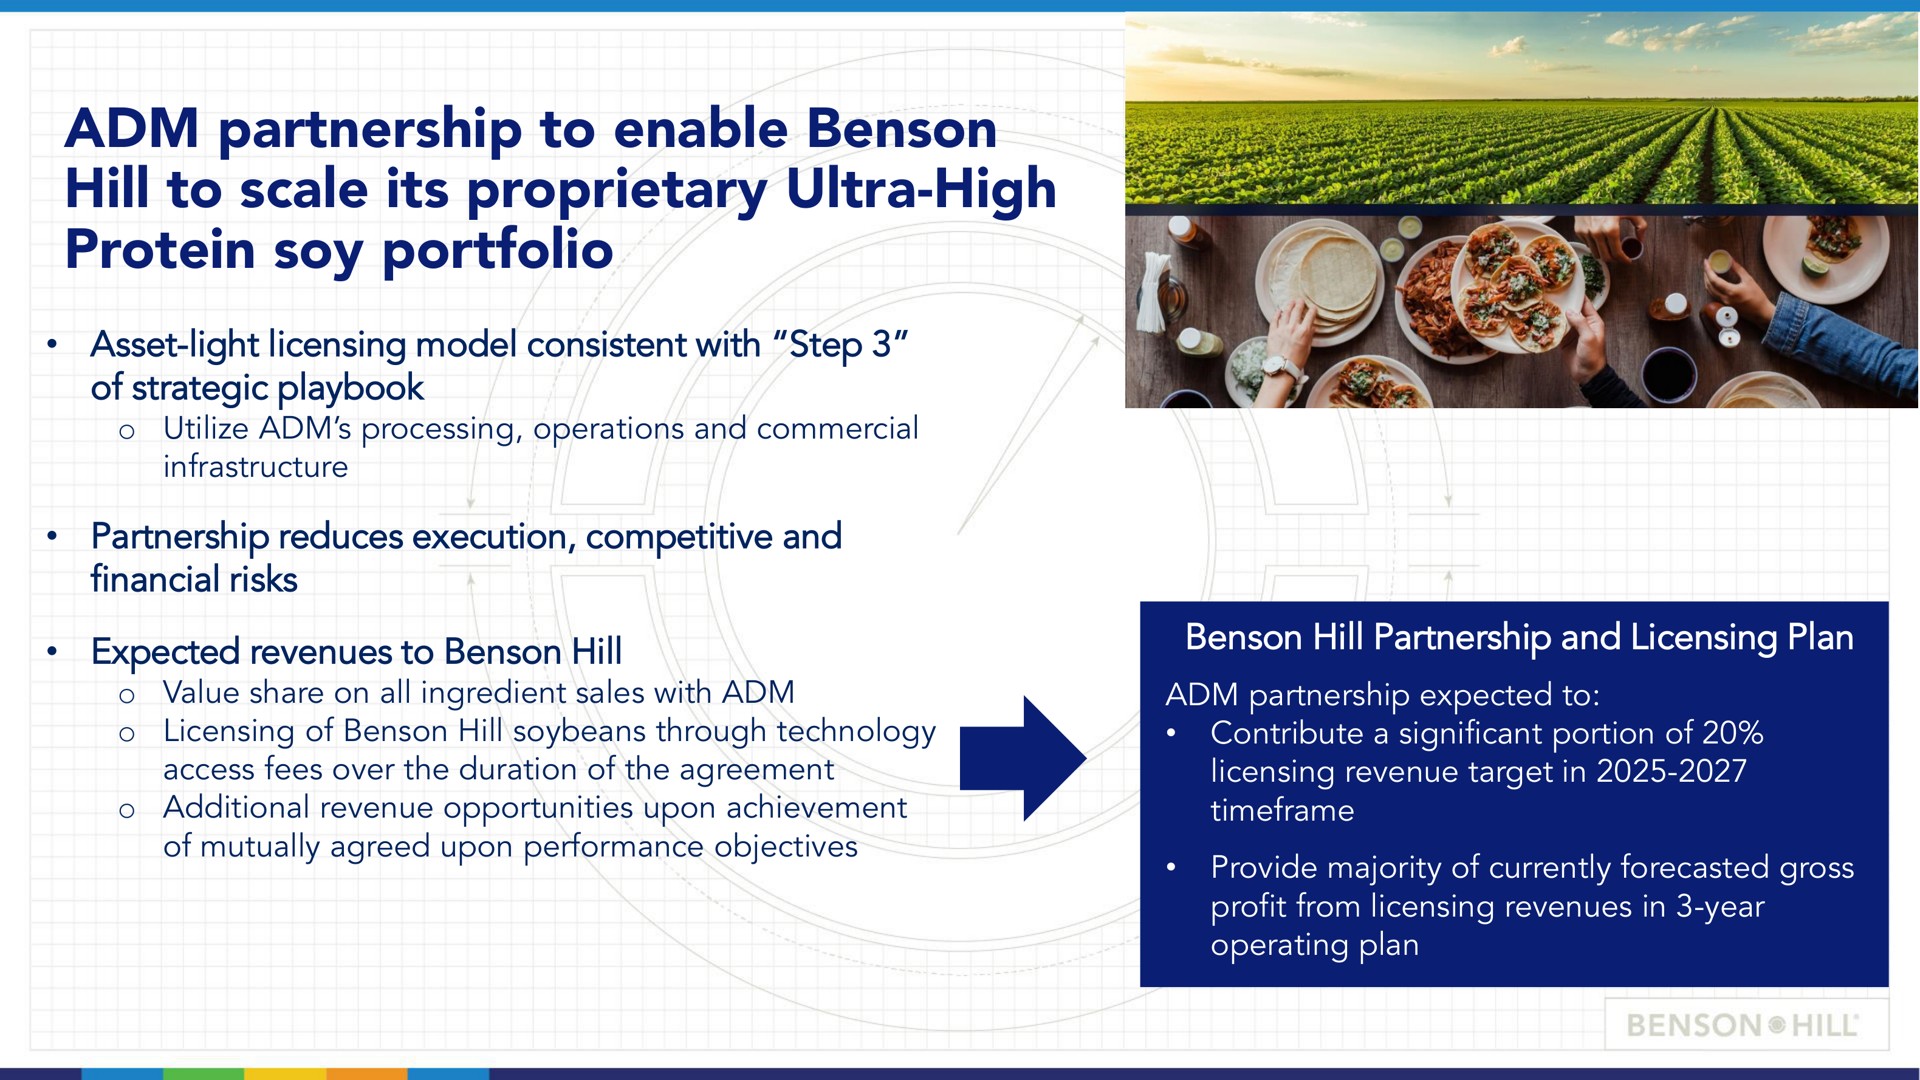 partnership to enable hill to scale its proprietary ultra high protein soy portfolio | Benson Hill